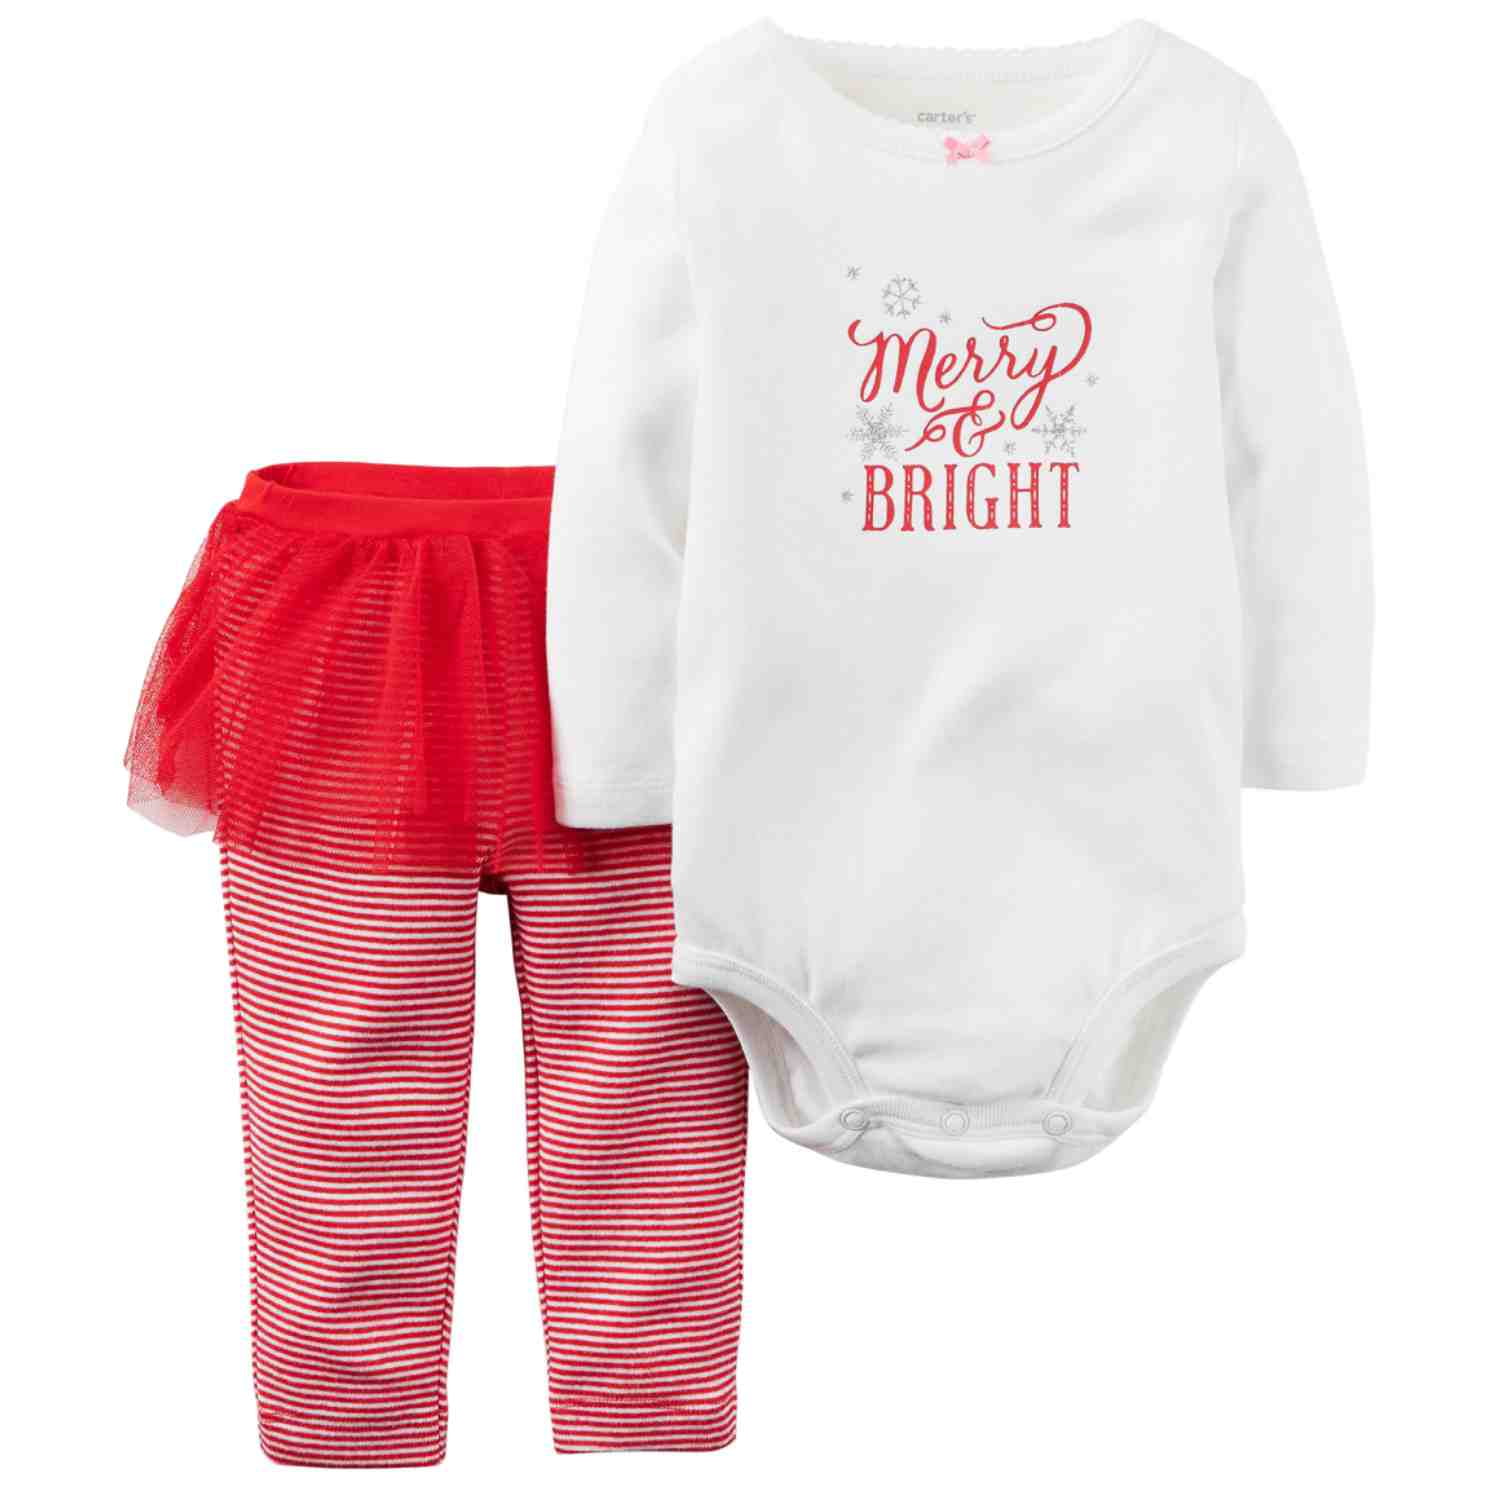 3T Toddler Just One You Carter's Christmas Outfit bodysuit red tutu & Legging 